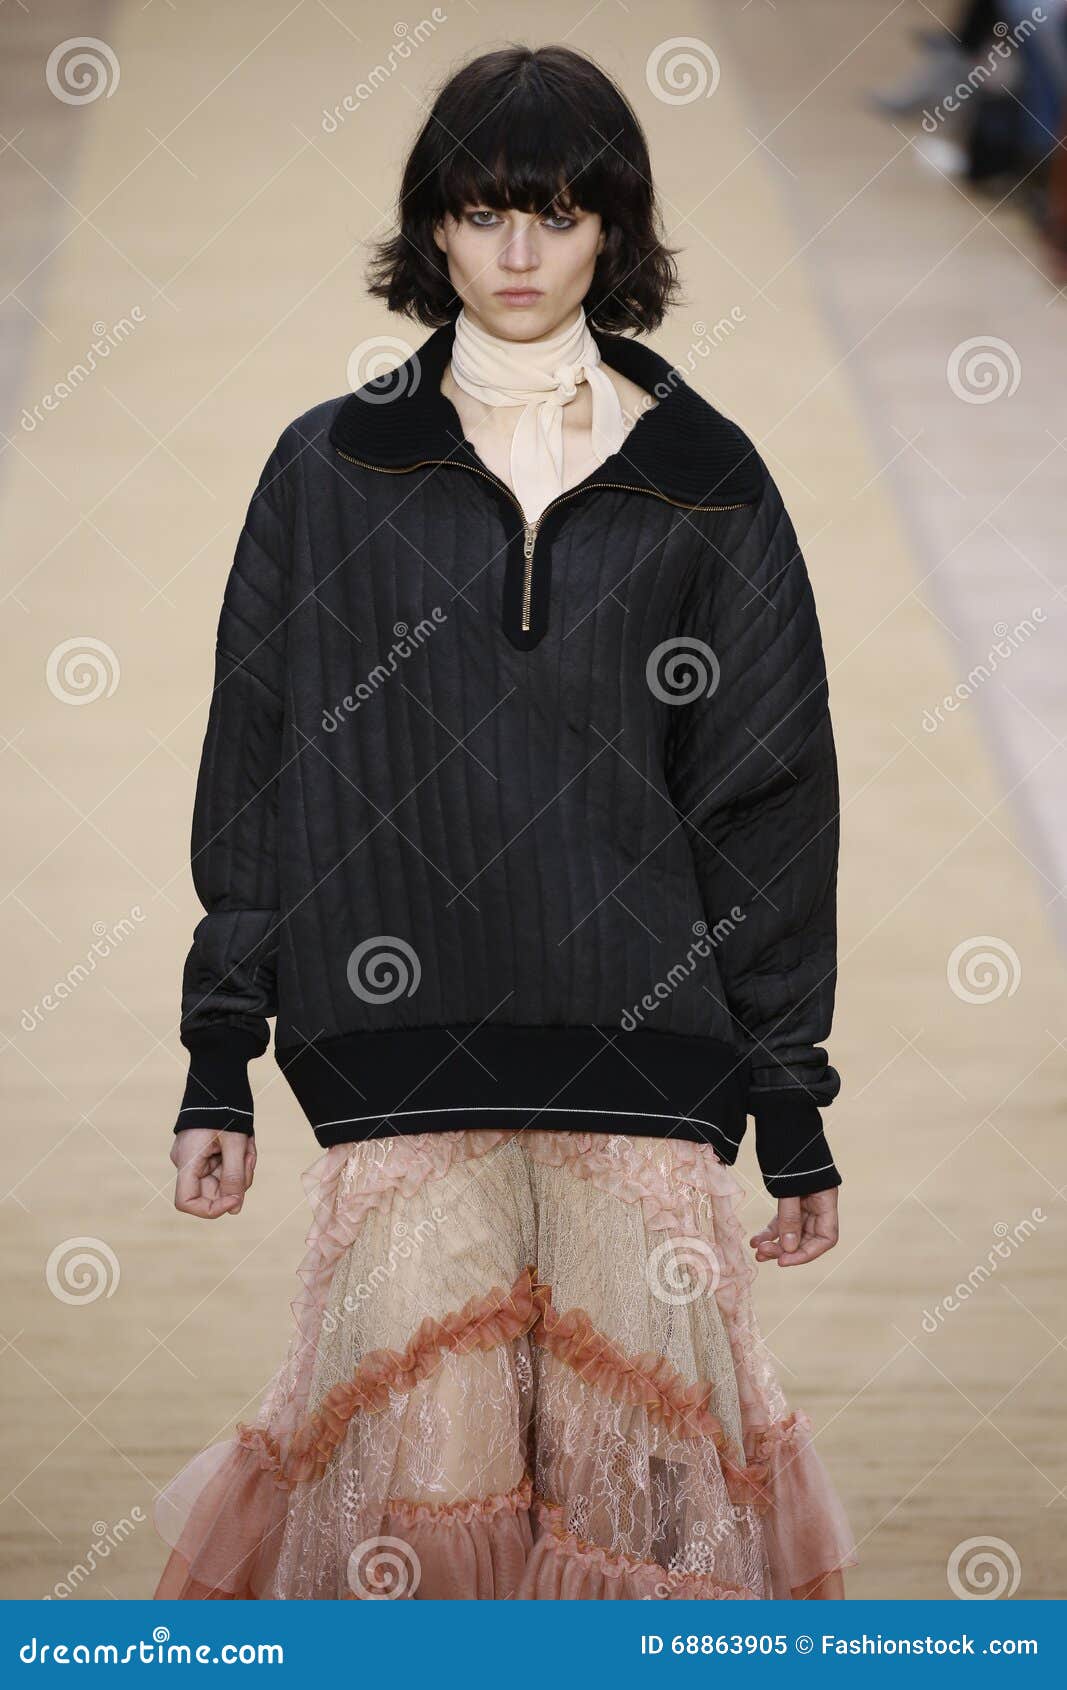 A Model Walks the Runway during the Chloe Show Editorial Image - Image ...